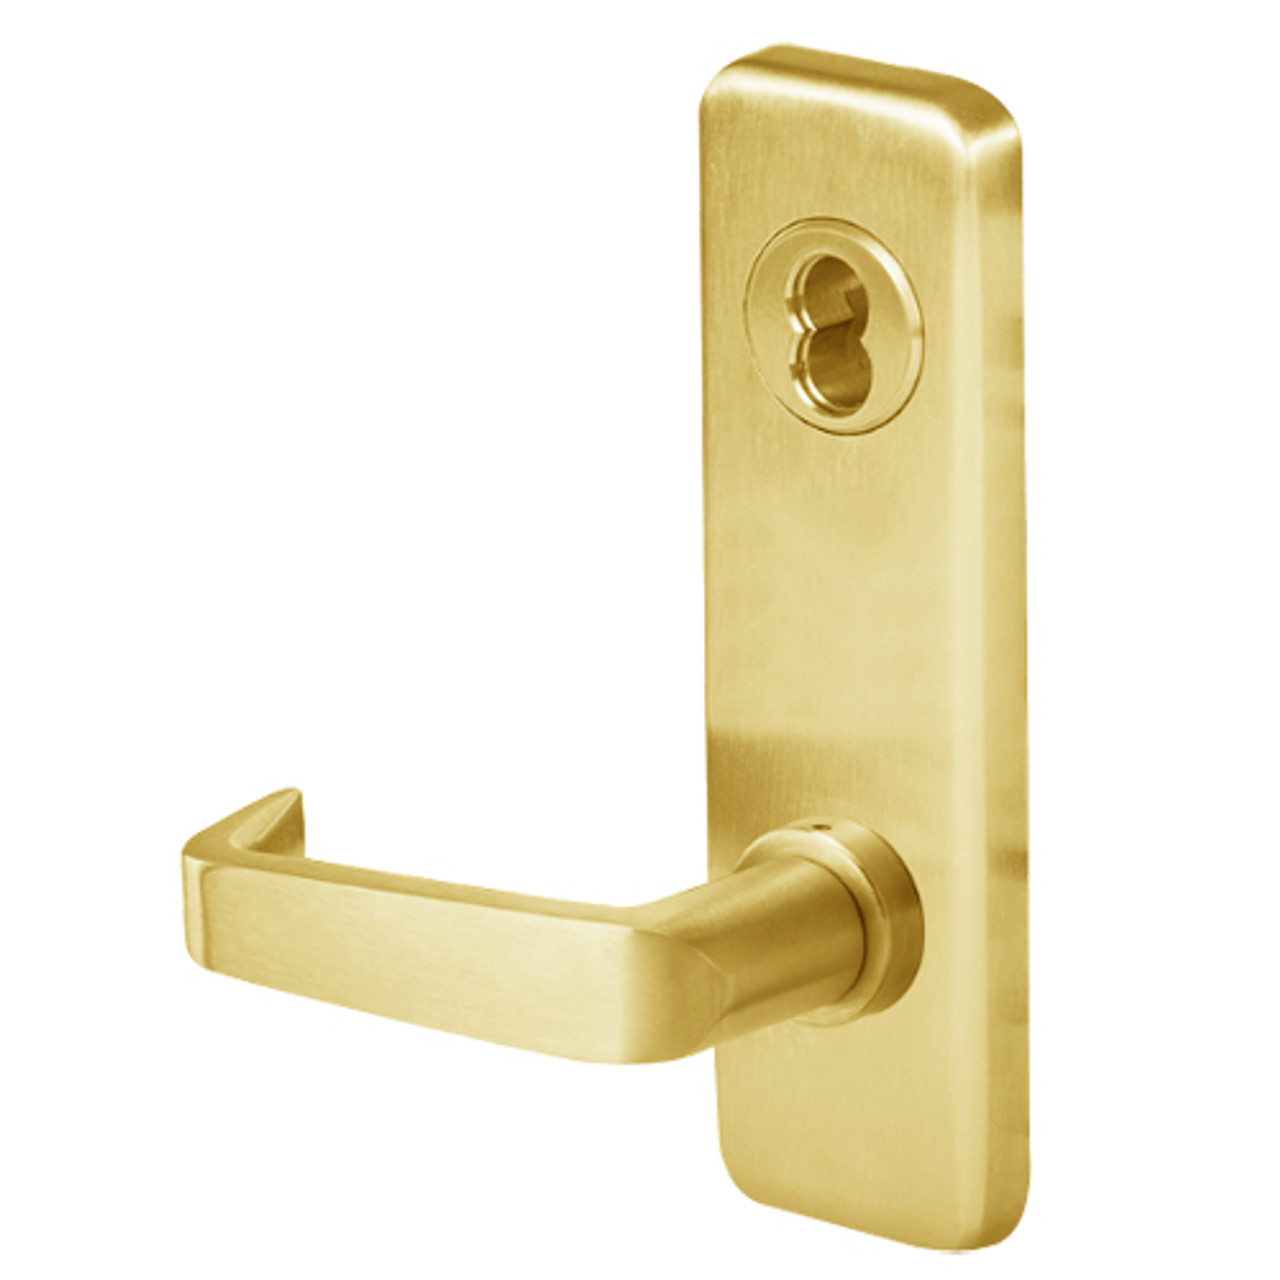 45H0L15J605 Best 40H Series Privacy with Deadbolt Heavy Duty Mortise Lever Lock with Contour with Angle Return Style in Bright Brass